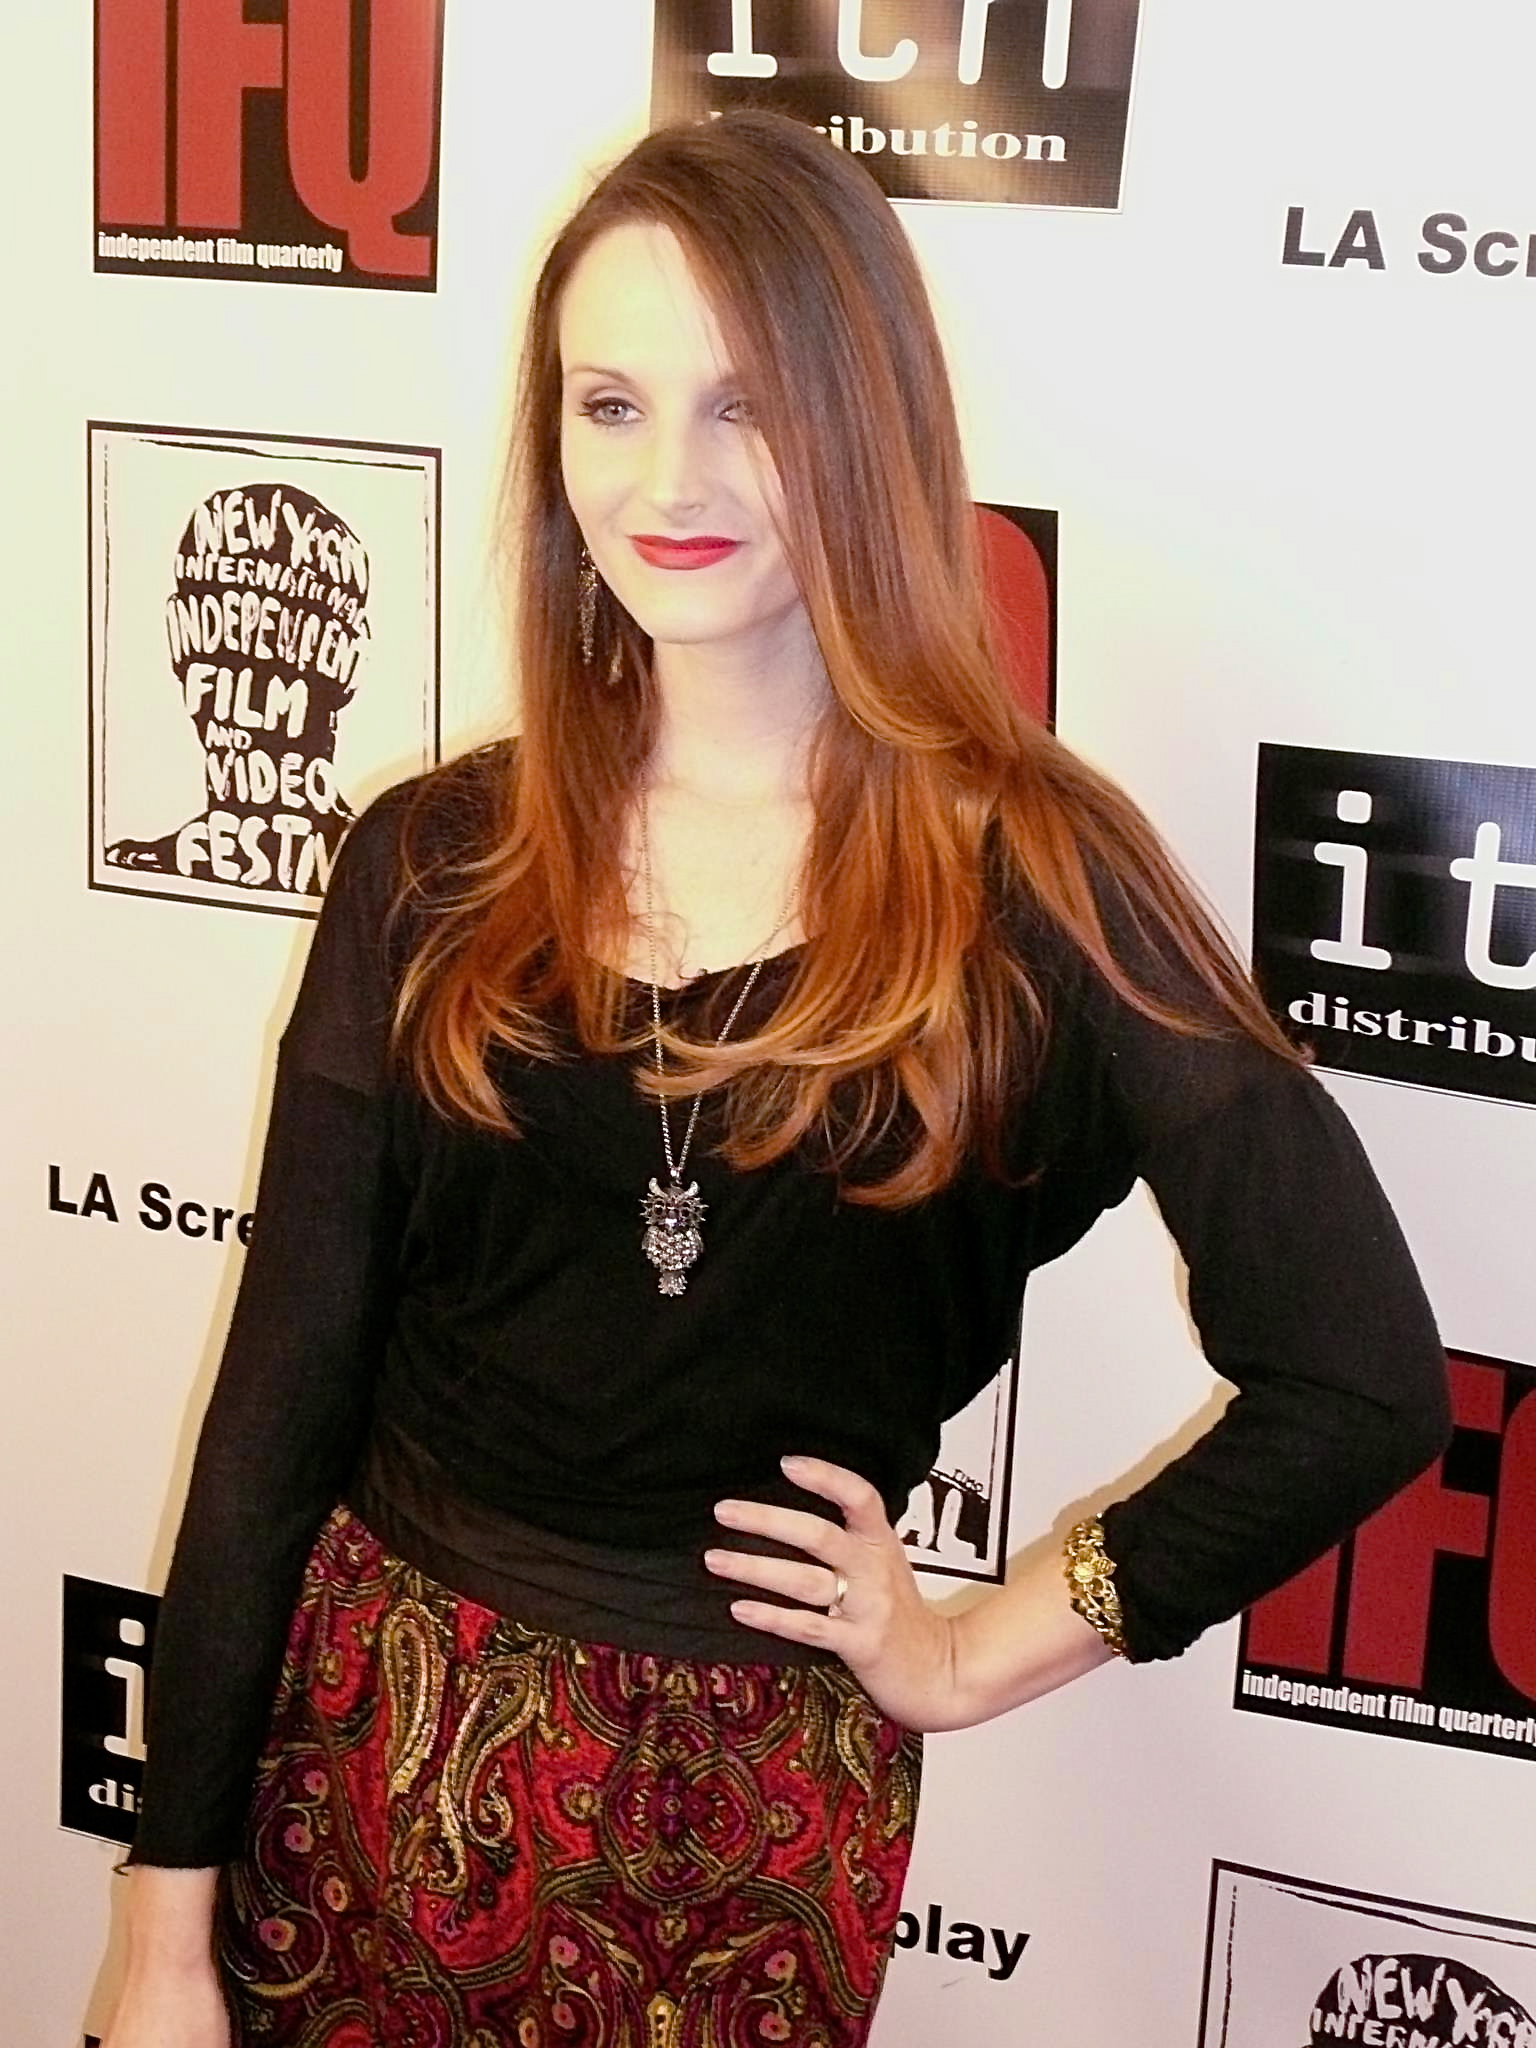 Hollis at the IFQ Film Festival, 2013, where she WON BEST DRAMA for her short film, 